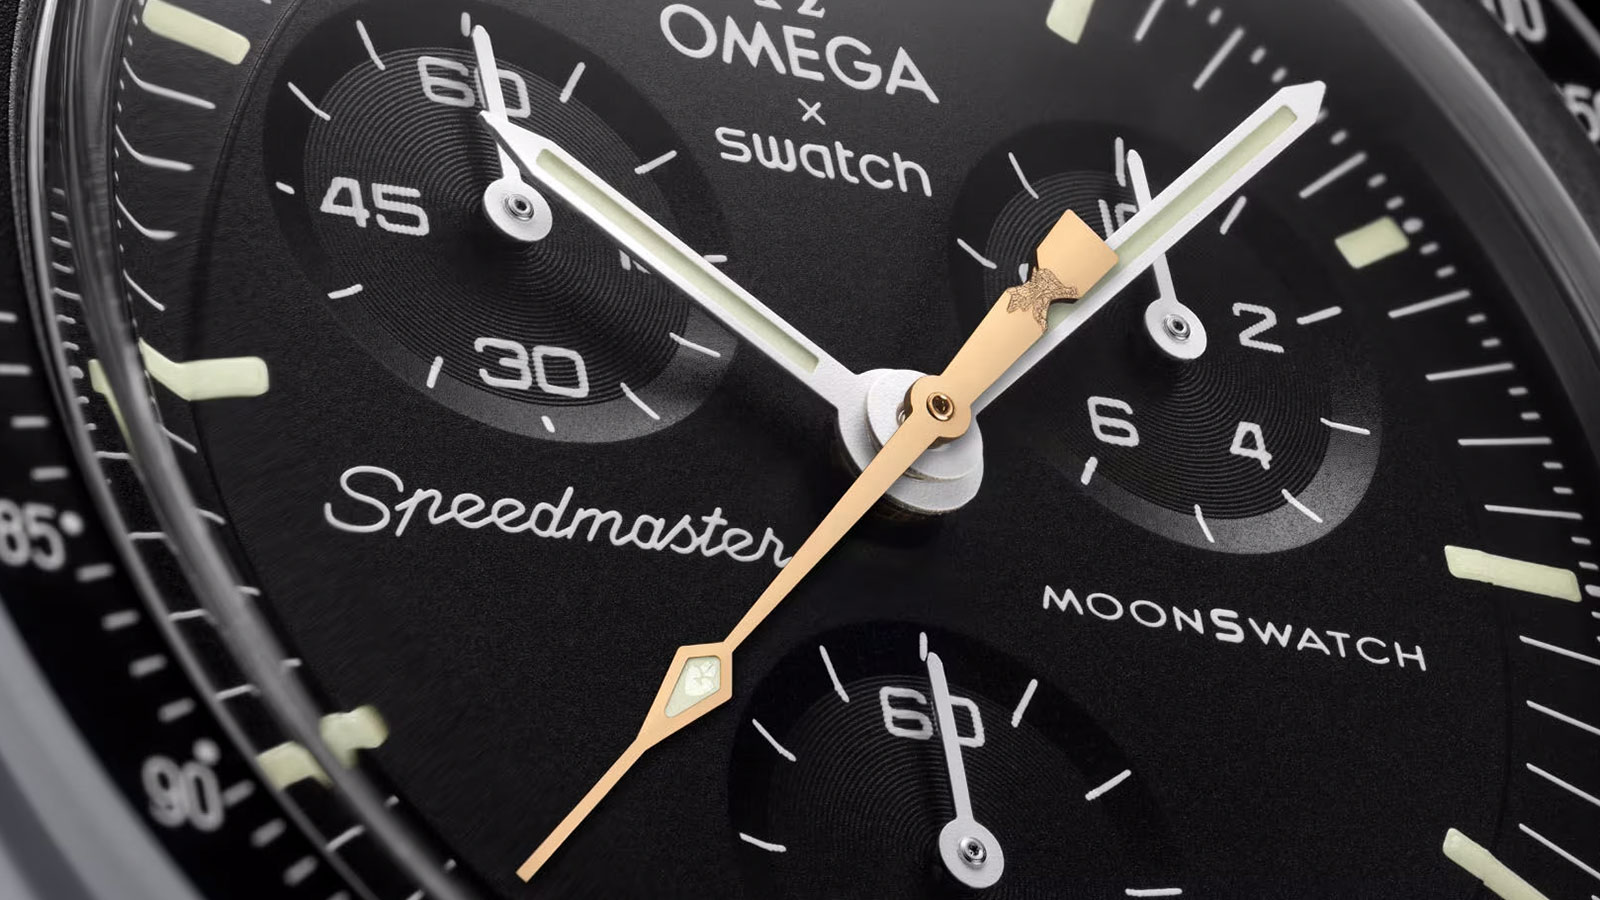 Swatch’s Mission to the Moon watch